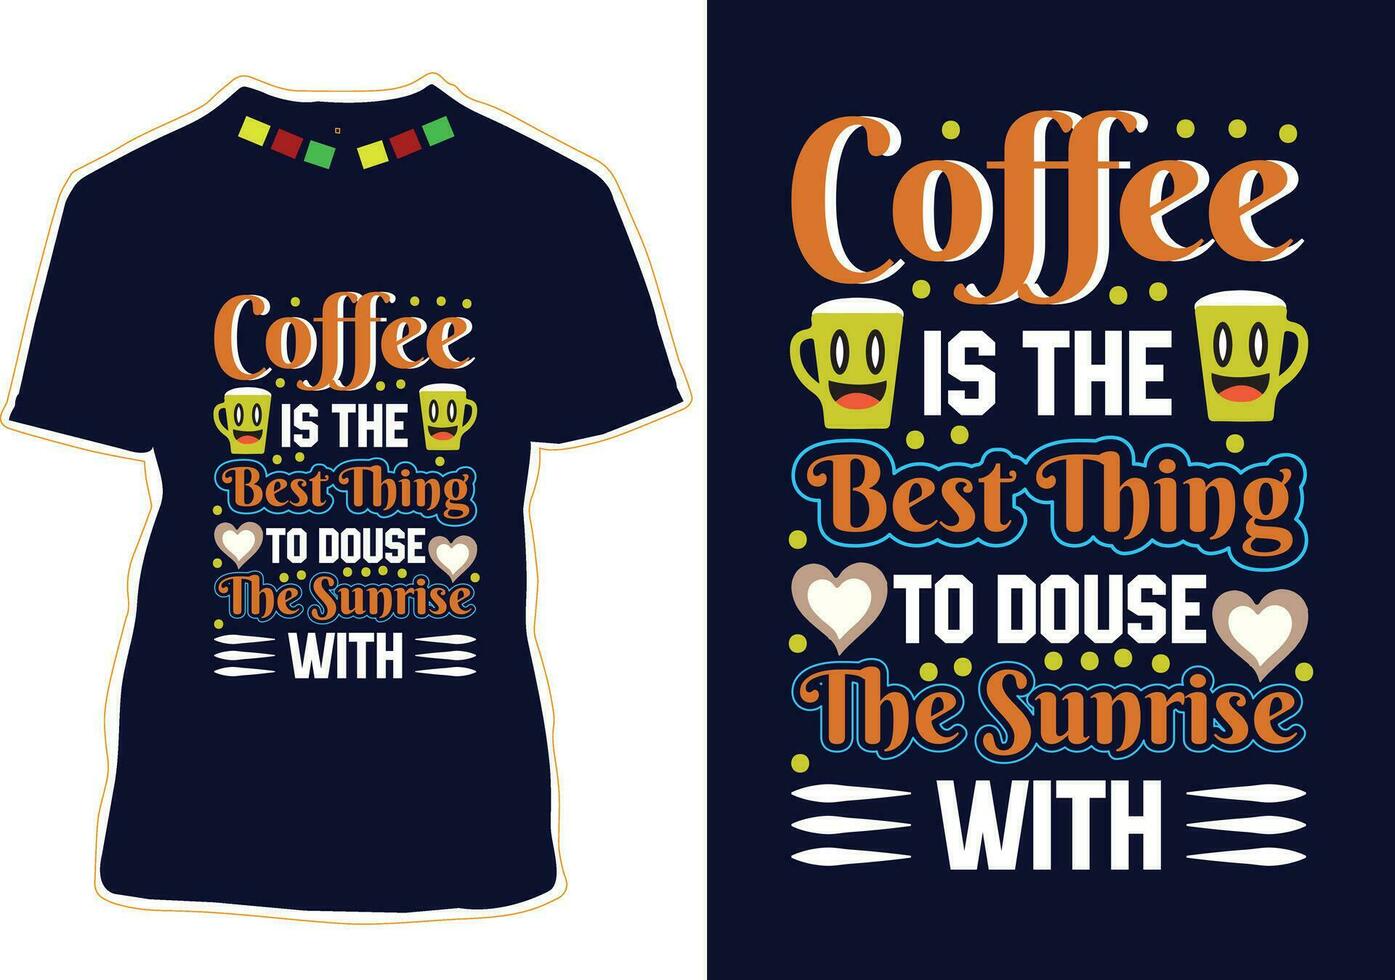 Coffee is the best thing to douse the sunrise with, International Coffee Day T-shirt Design vector